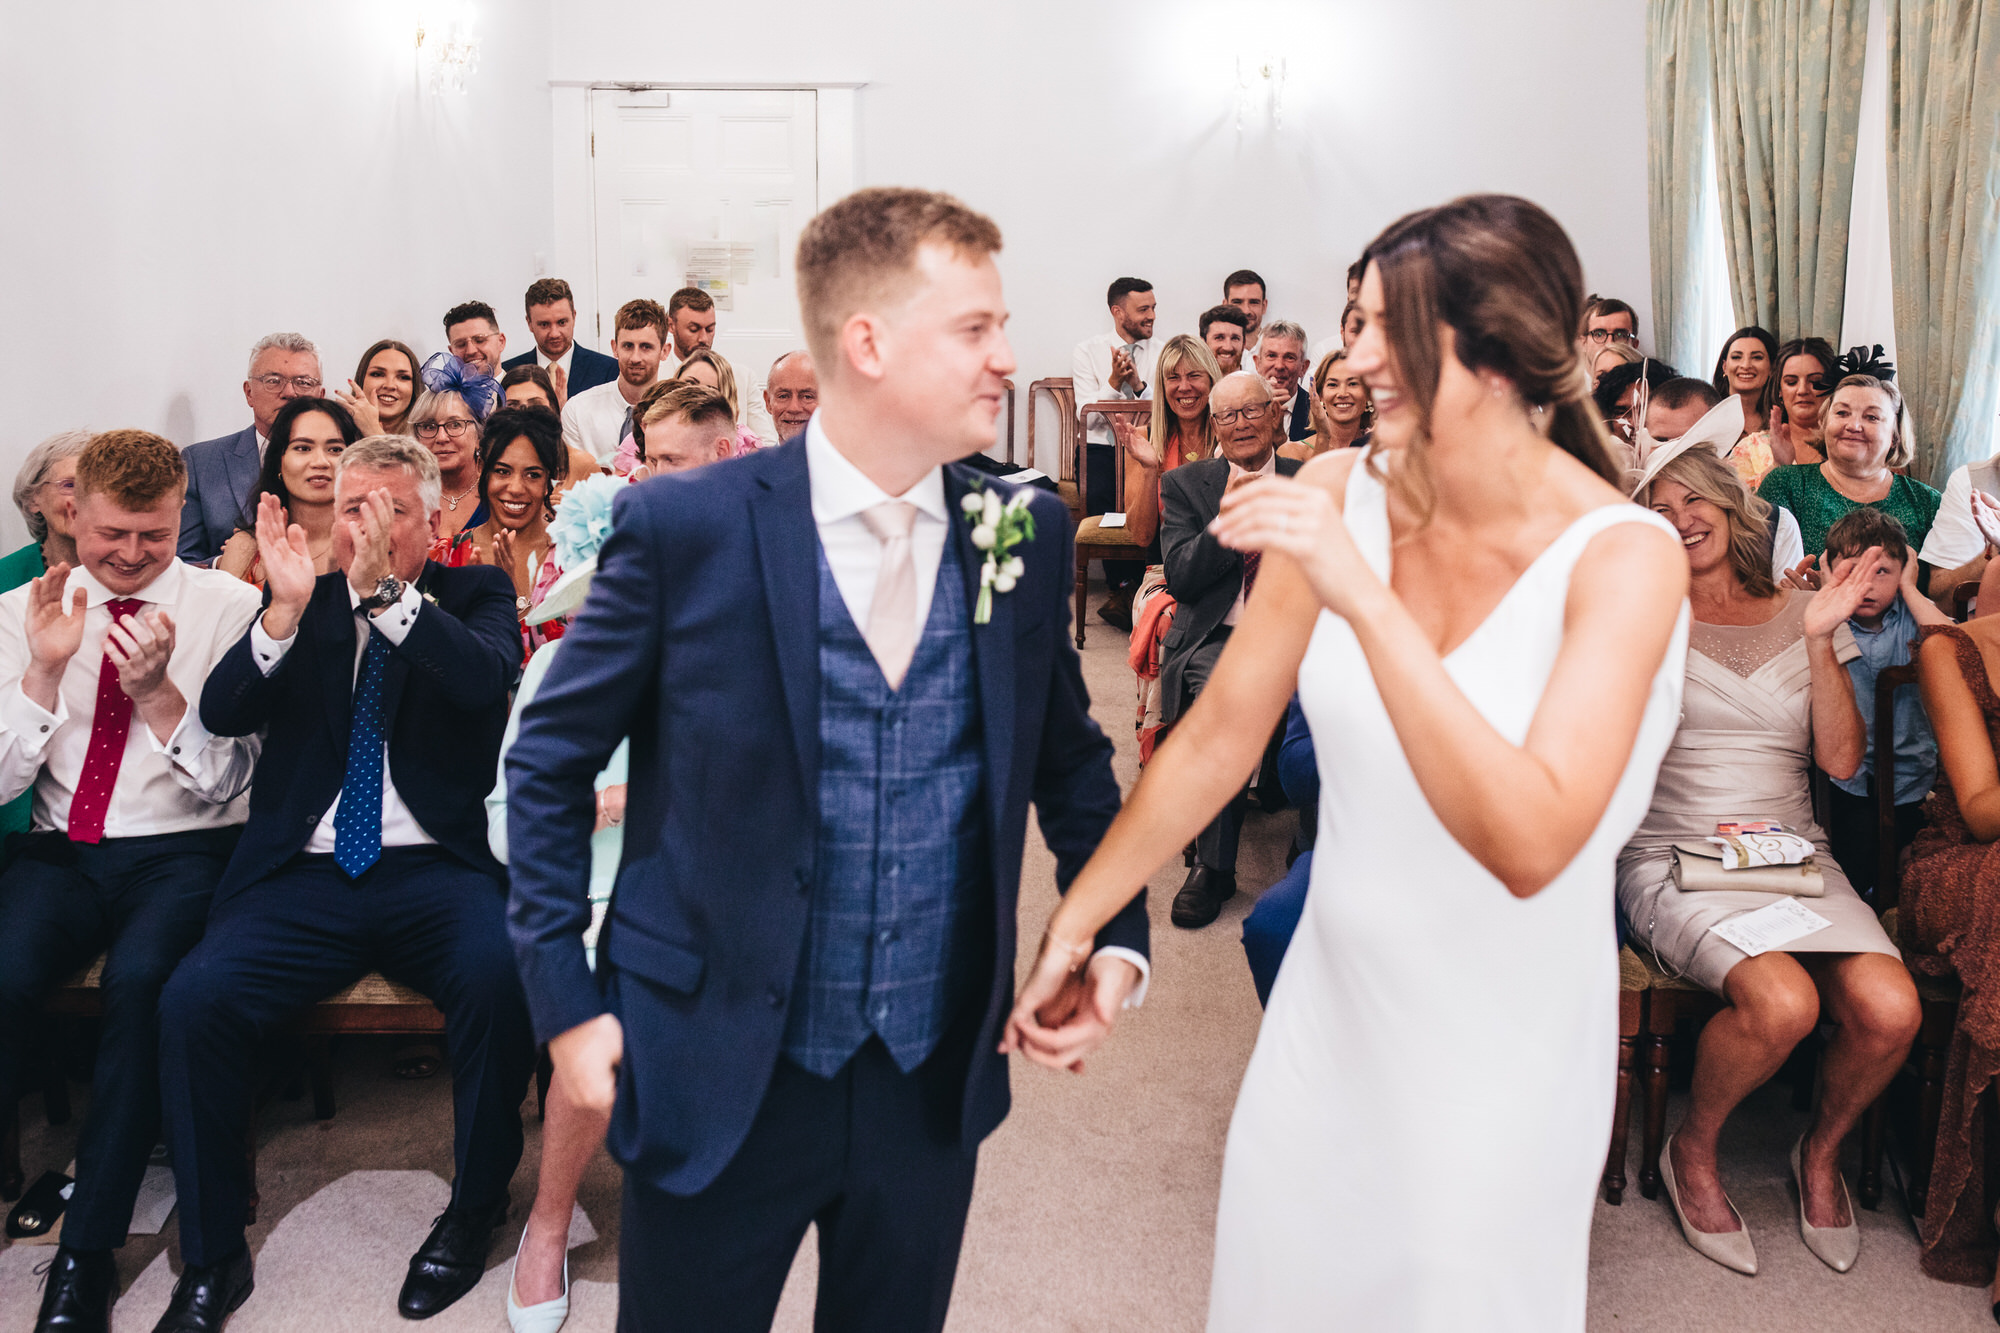 guests applaud, clapping bride and groom at ceremony